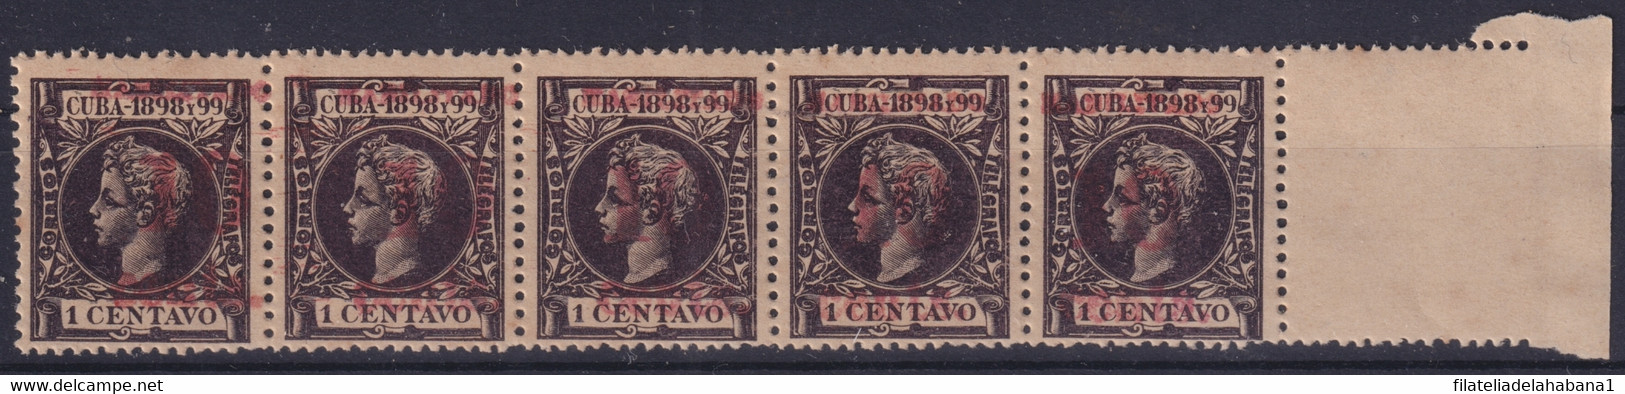 1899-486 CUBA 1899 10c S. 1c US OCCUPATION 4th ISSUE COMPLETE TRIP PHILATELIC FORGERY. - Ungebraucht